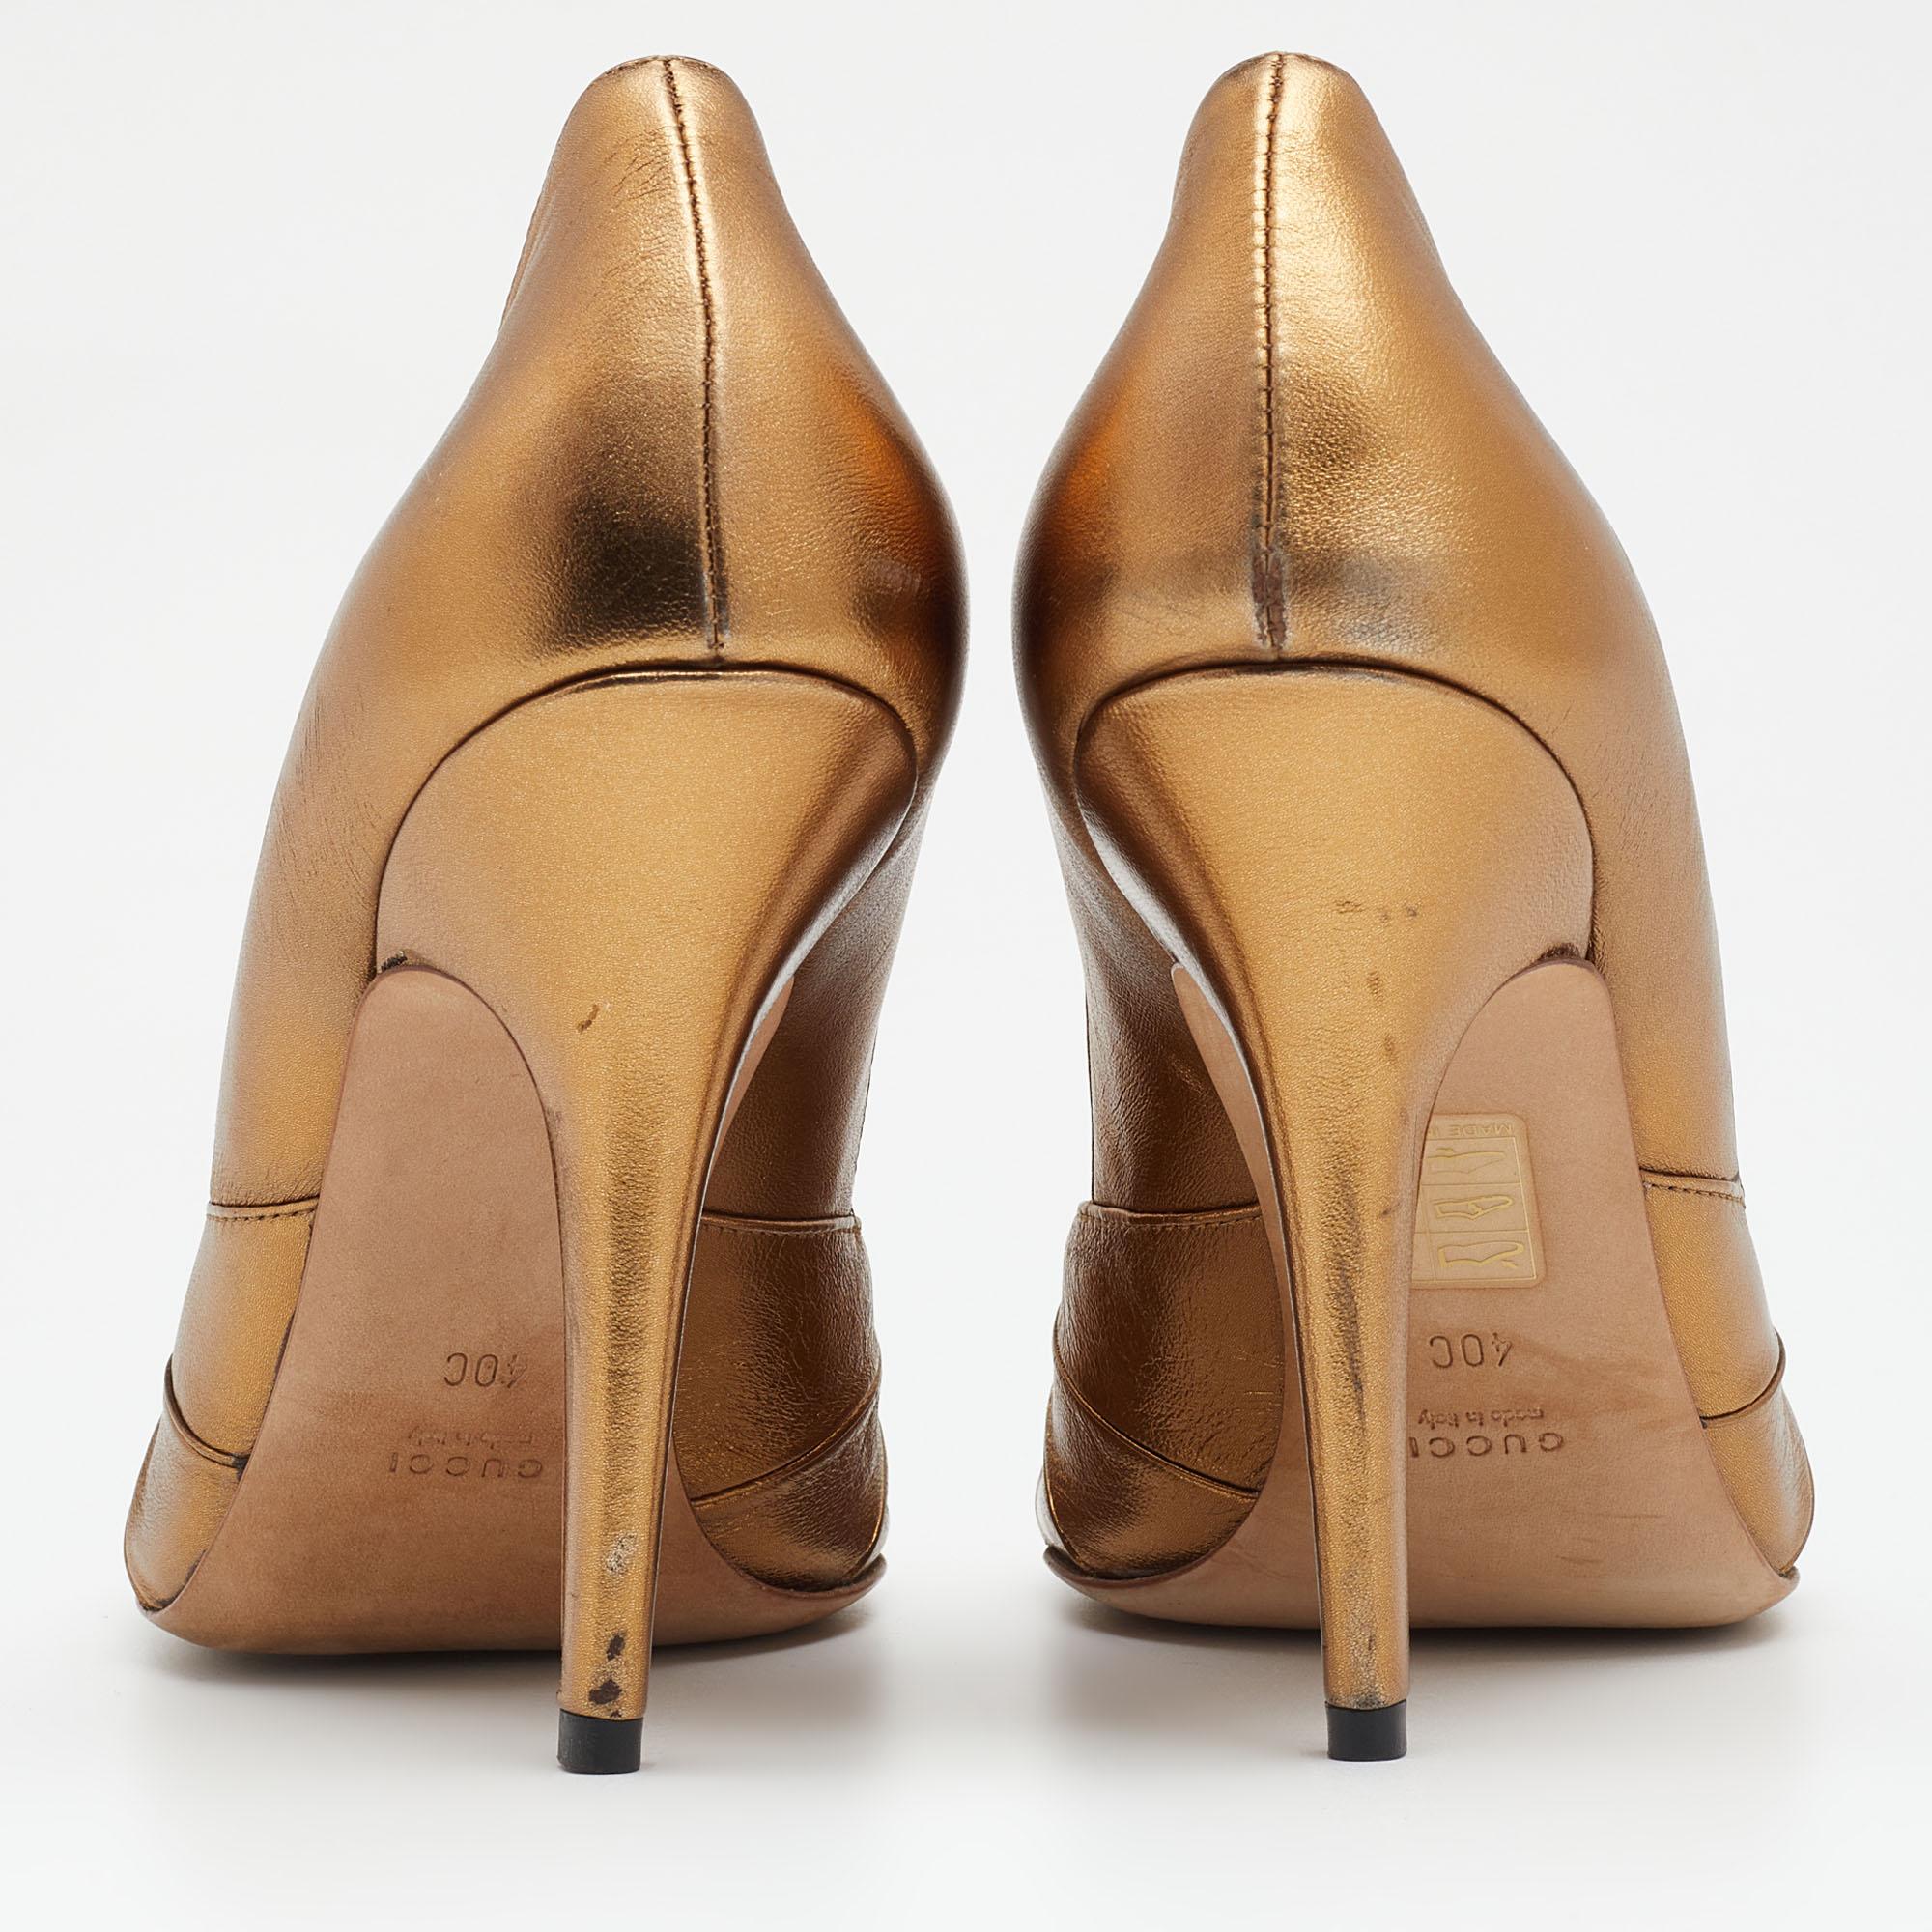 Gucci Metallic Gold Leather Knotted Peep Toe Pumps Size 40 For Sale 1